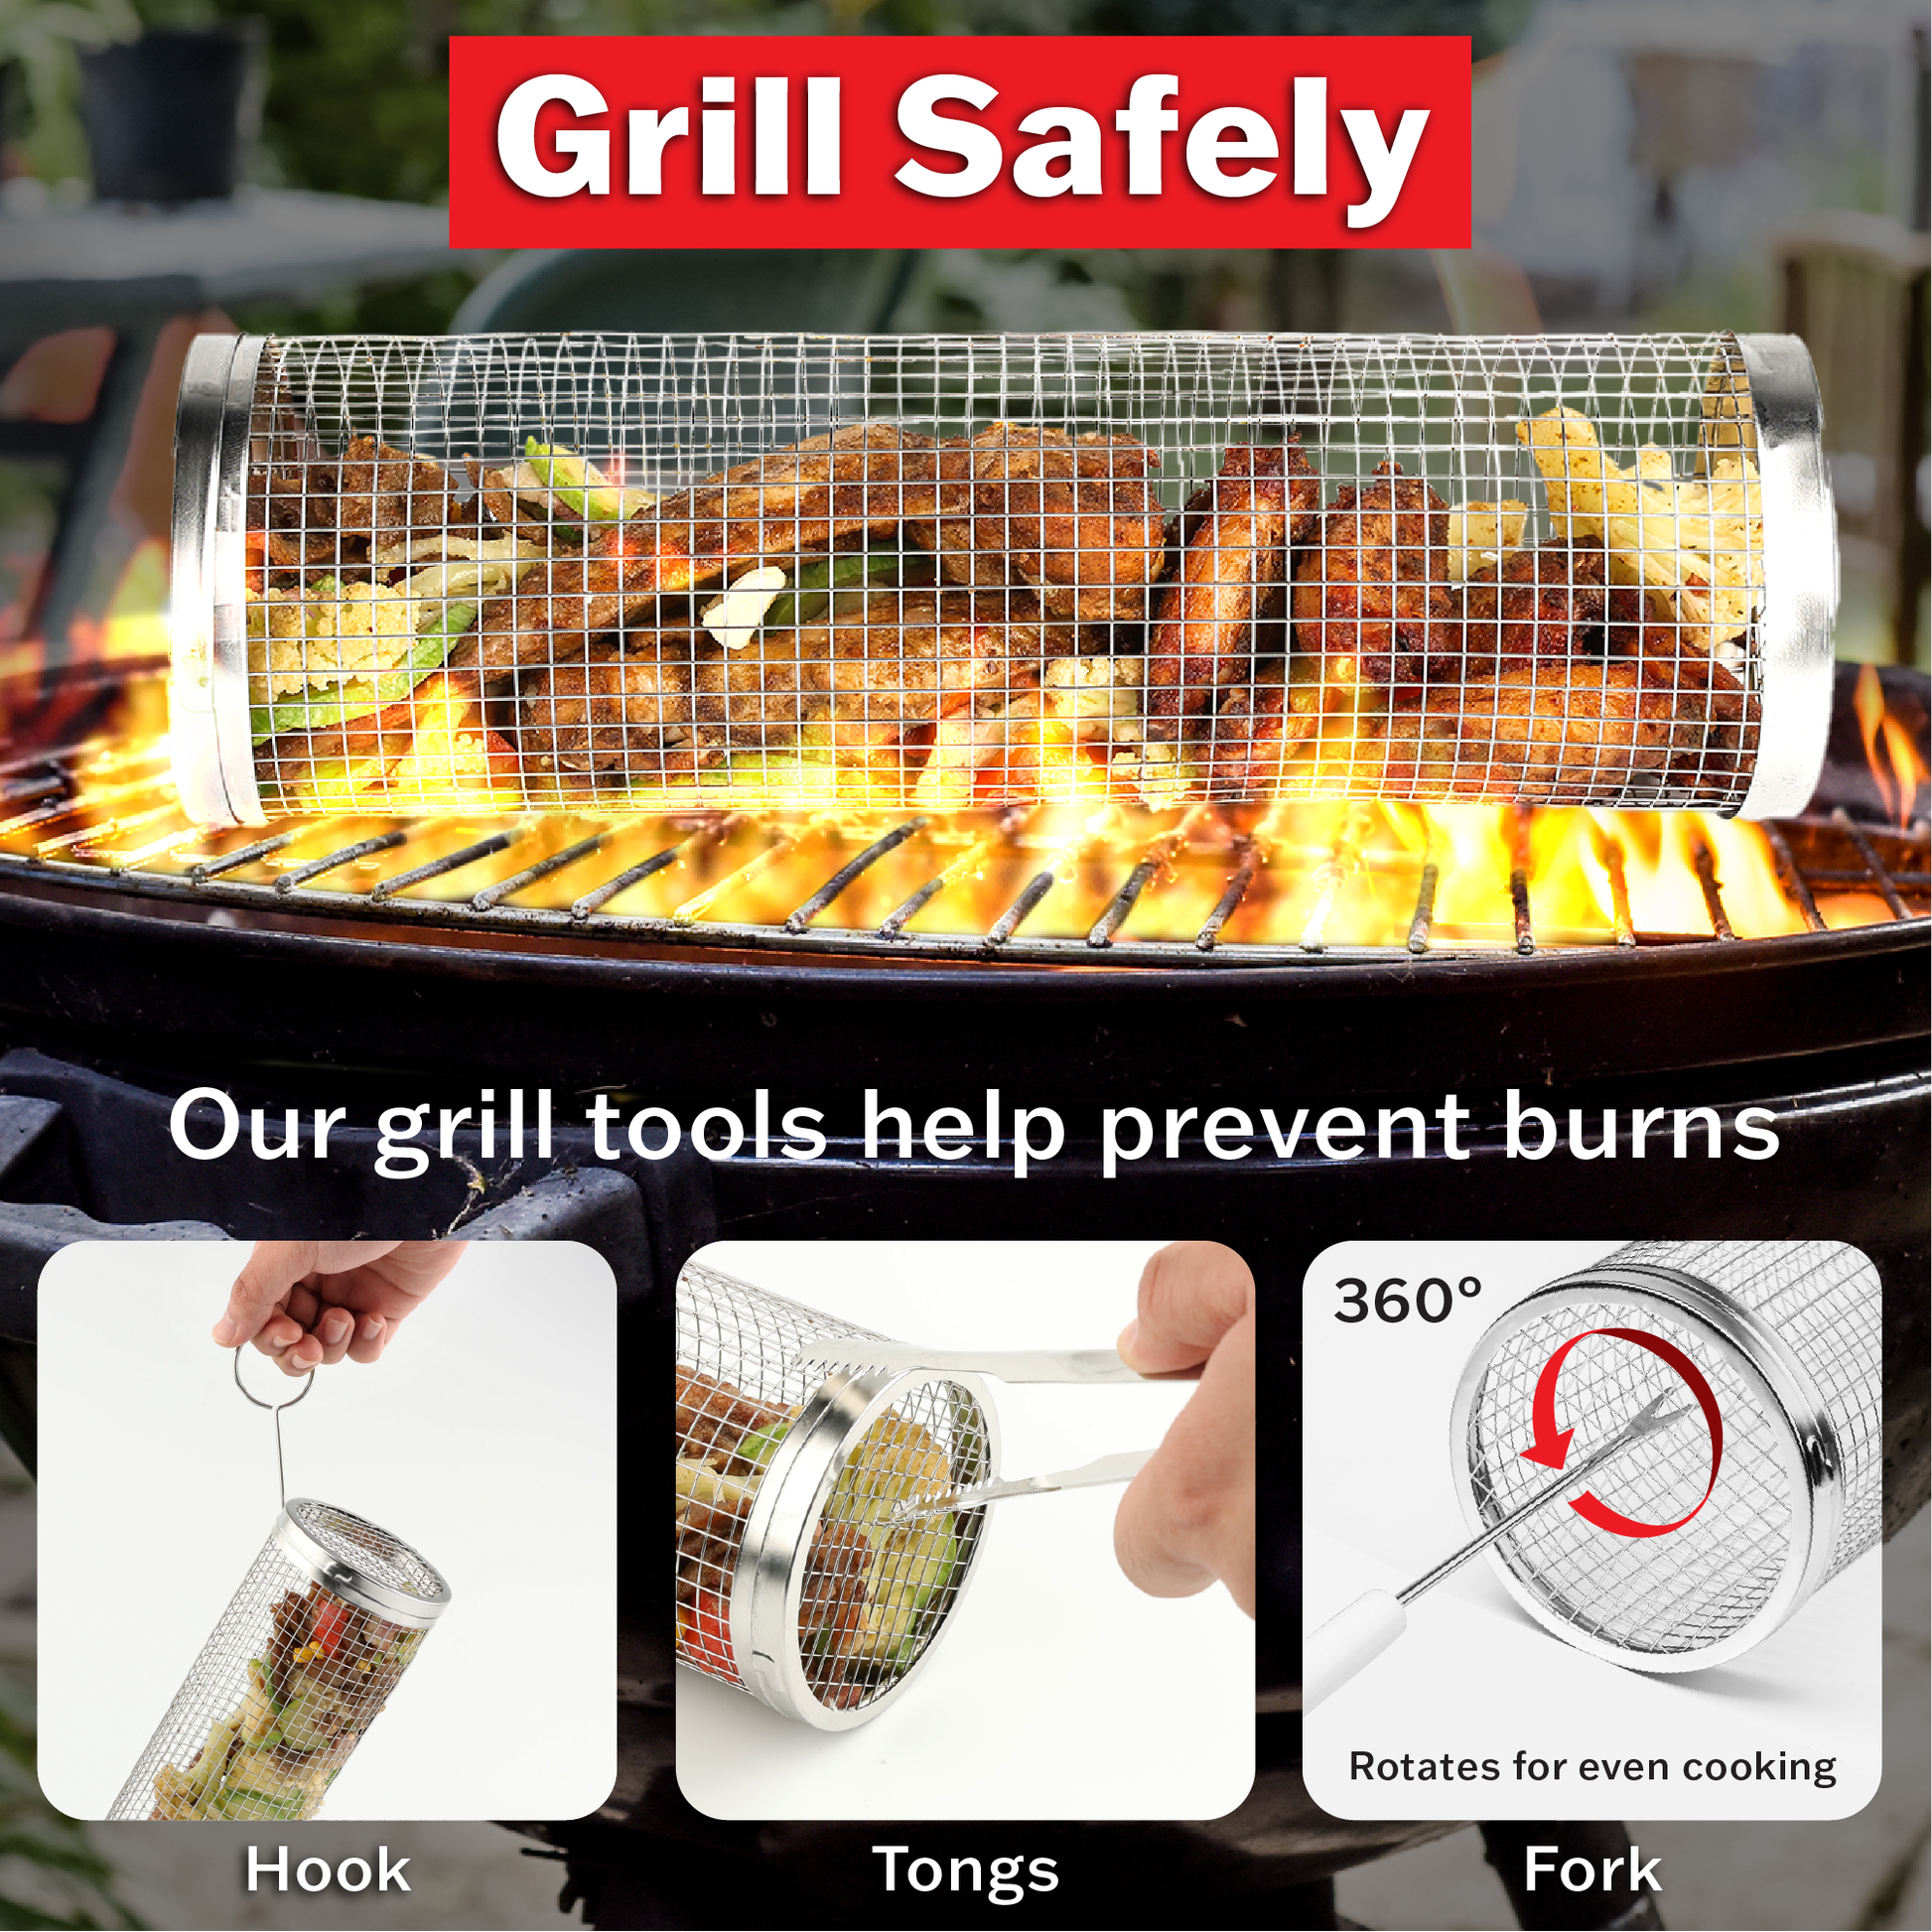 product features: hook, tongs, fork; text: grill safely, our grill tools help prevent burns